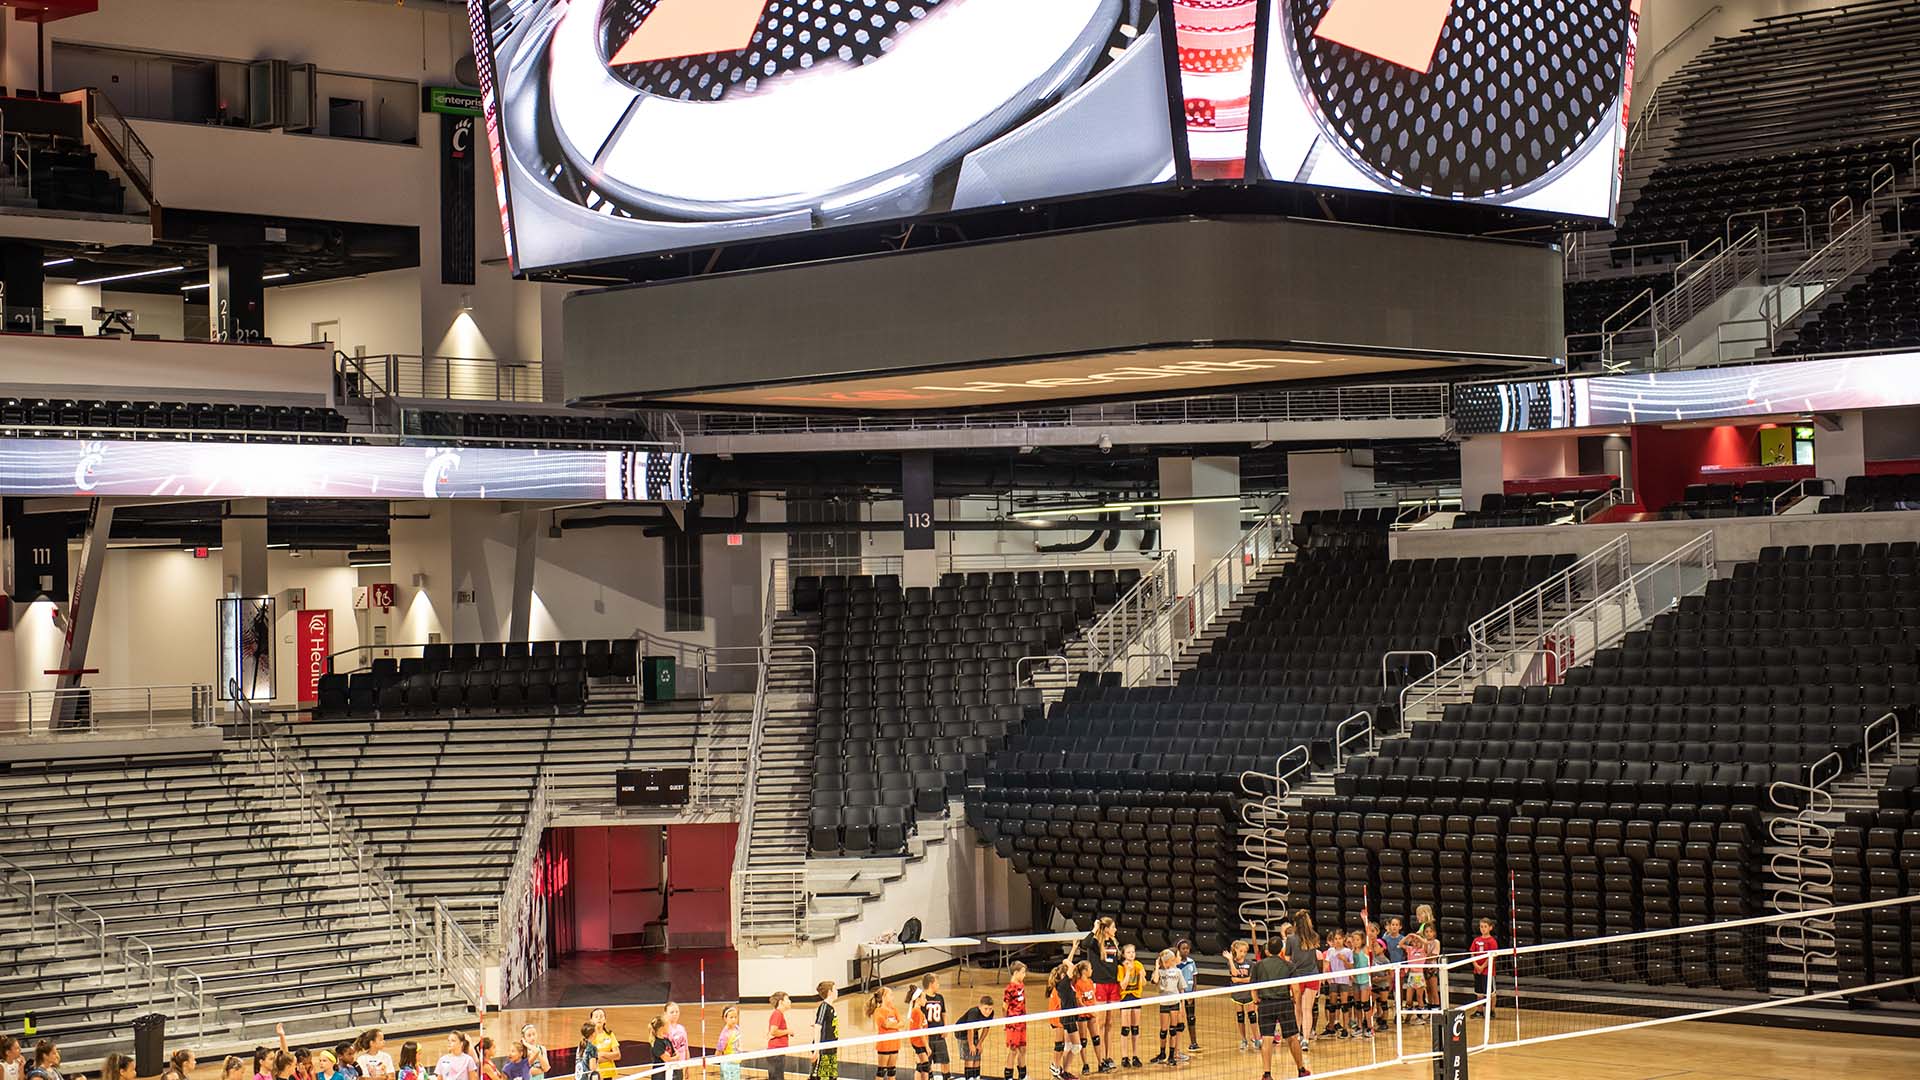 A closer view of the arena design at Fifth Third Arena - focusing on the bleacher seat design.